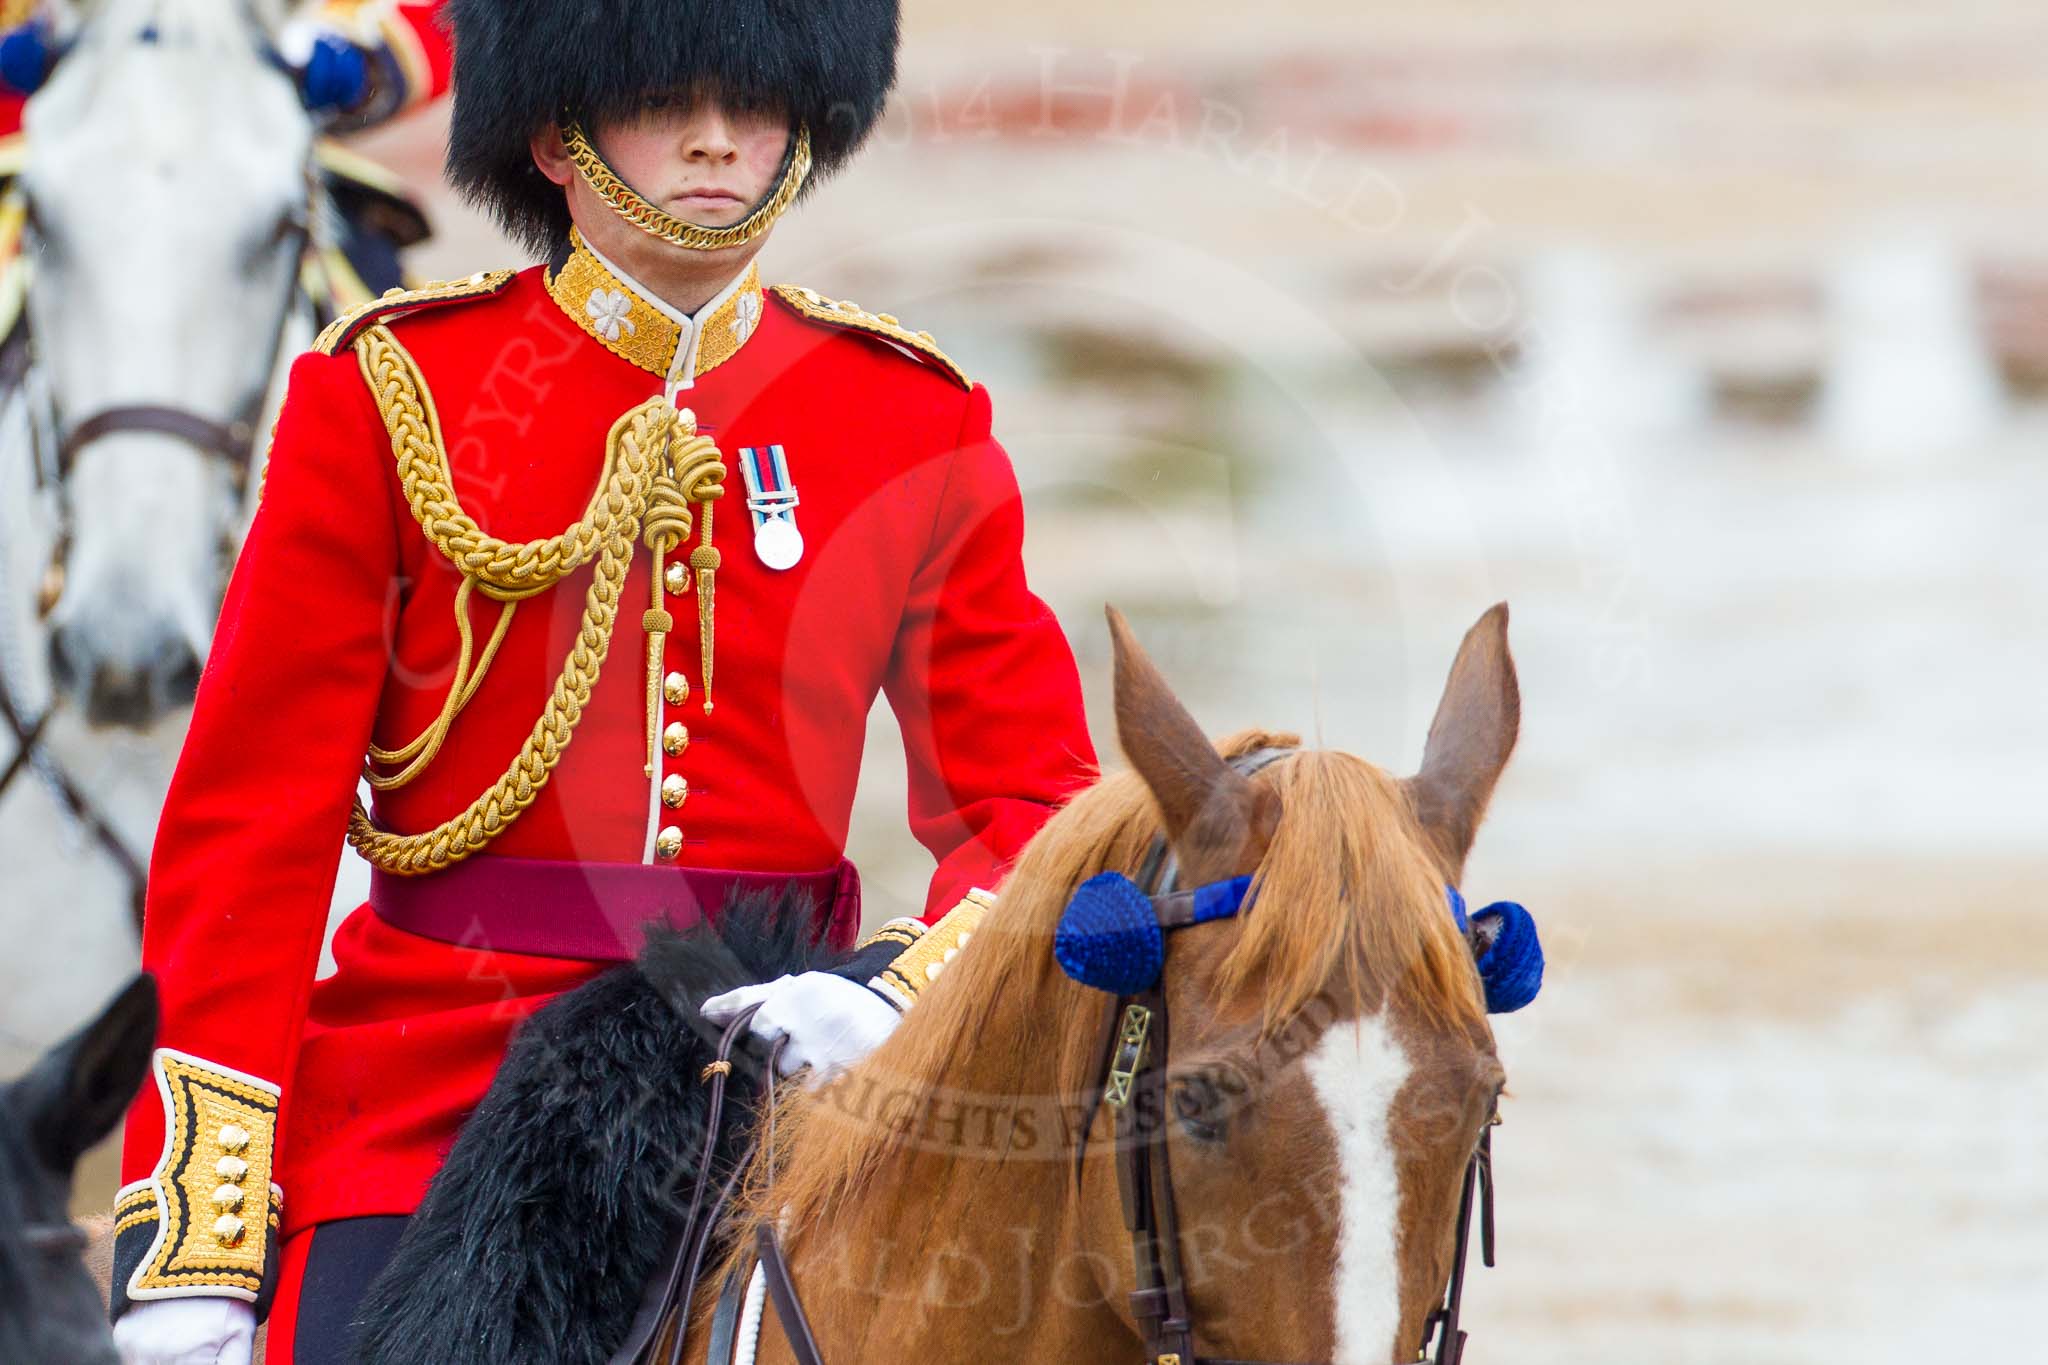 The Colonel's Review 2014.
Horse Guards Parade, Westminster,
London,

United Kingdom,
on 07 June 2014 at 11:05, image #304